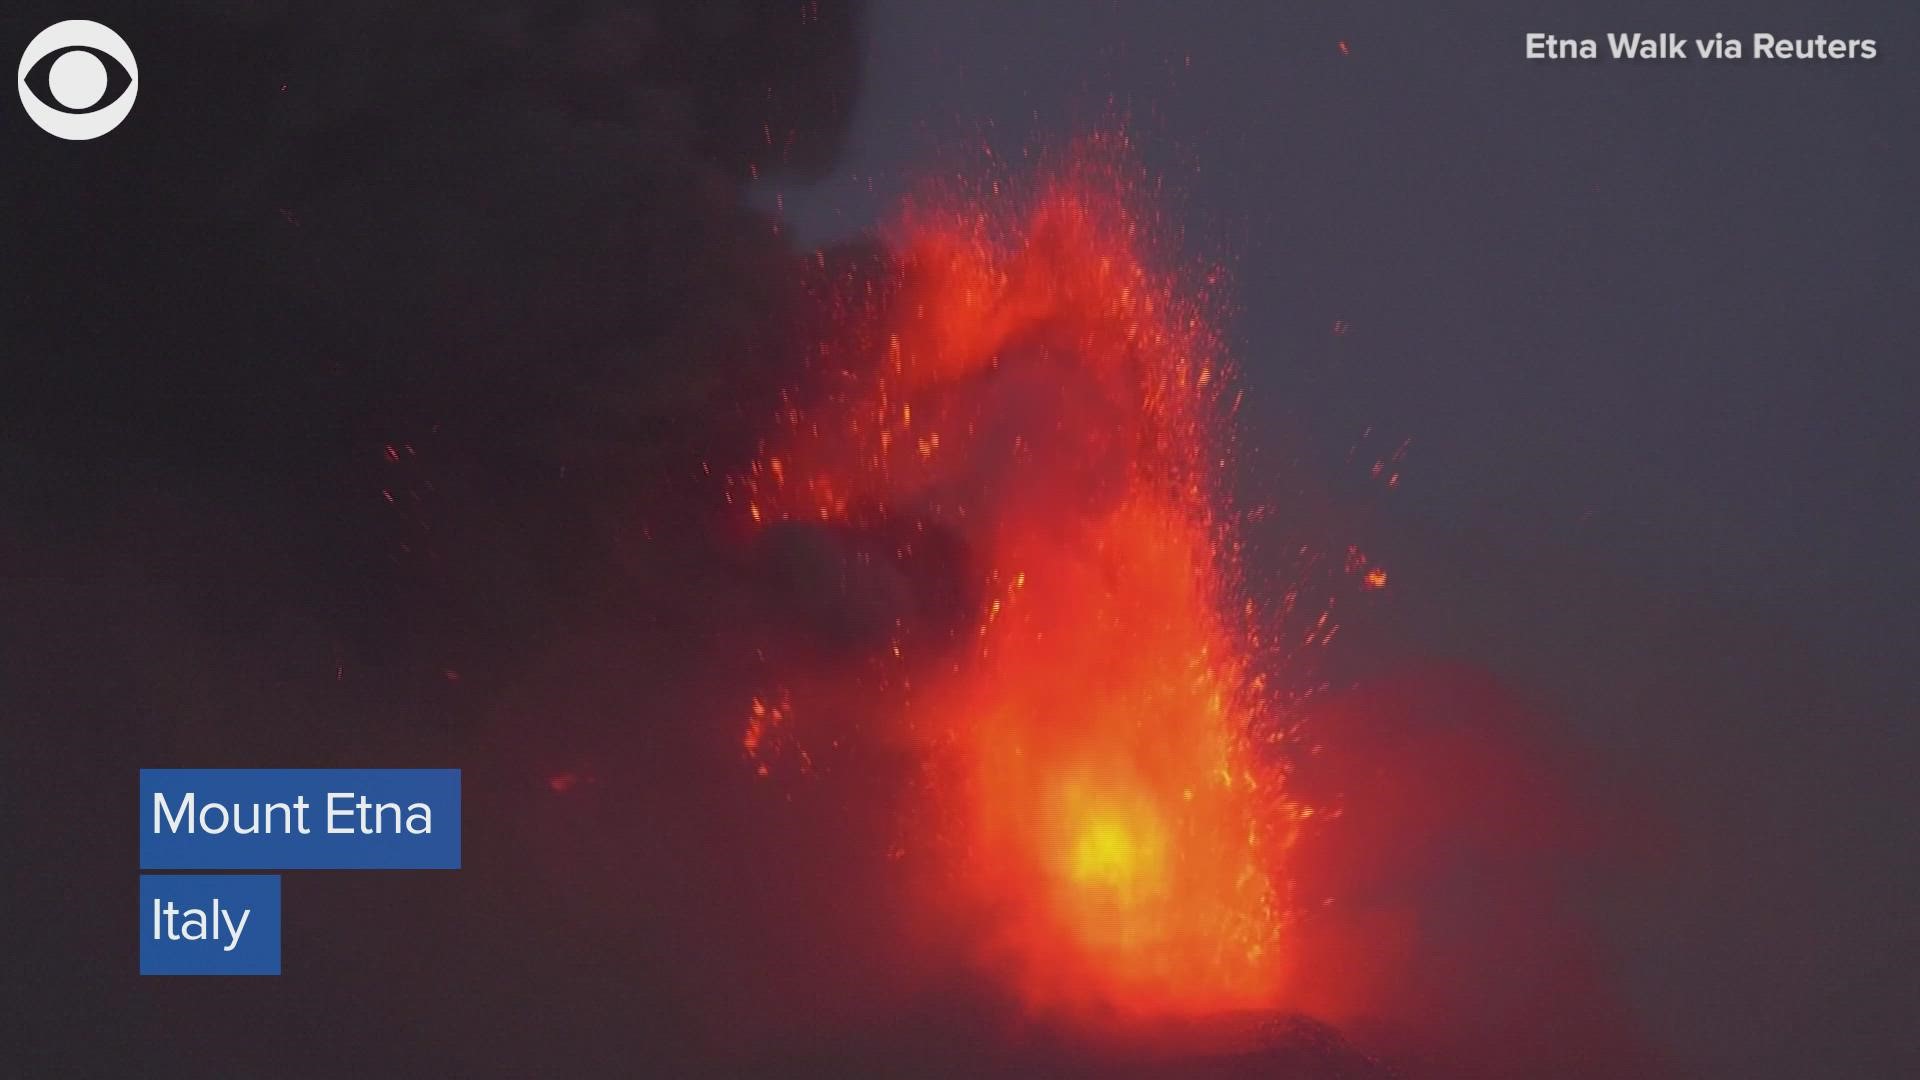 Italy's Mount Etna spewed red hot lava and sent smoke into the air early Monday morning.